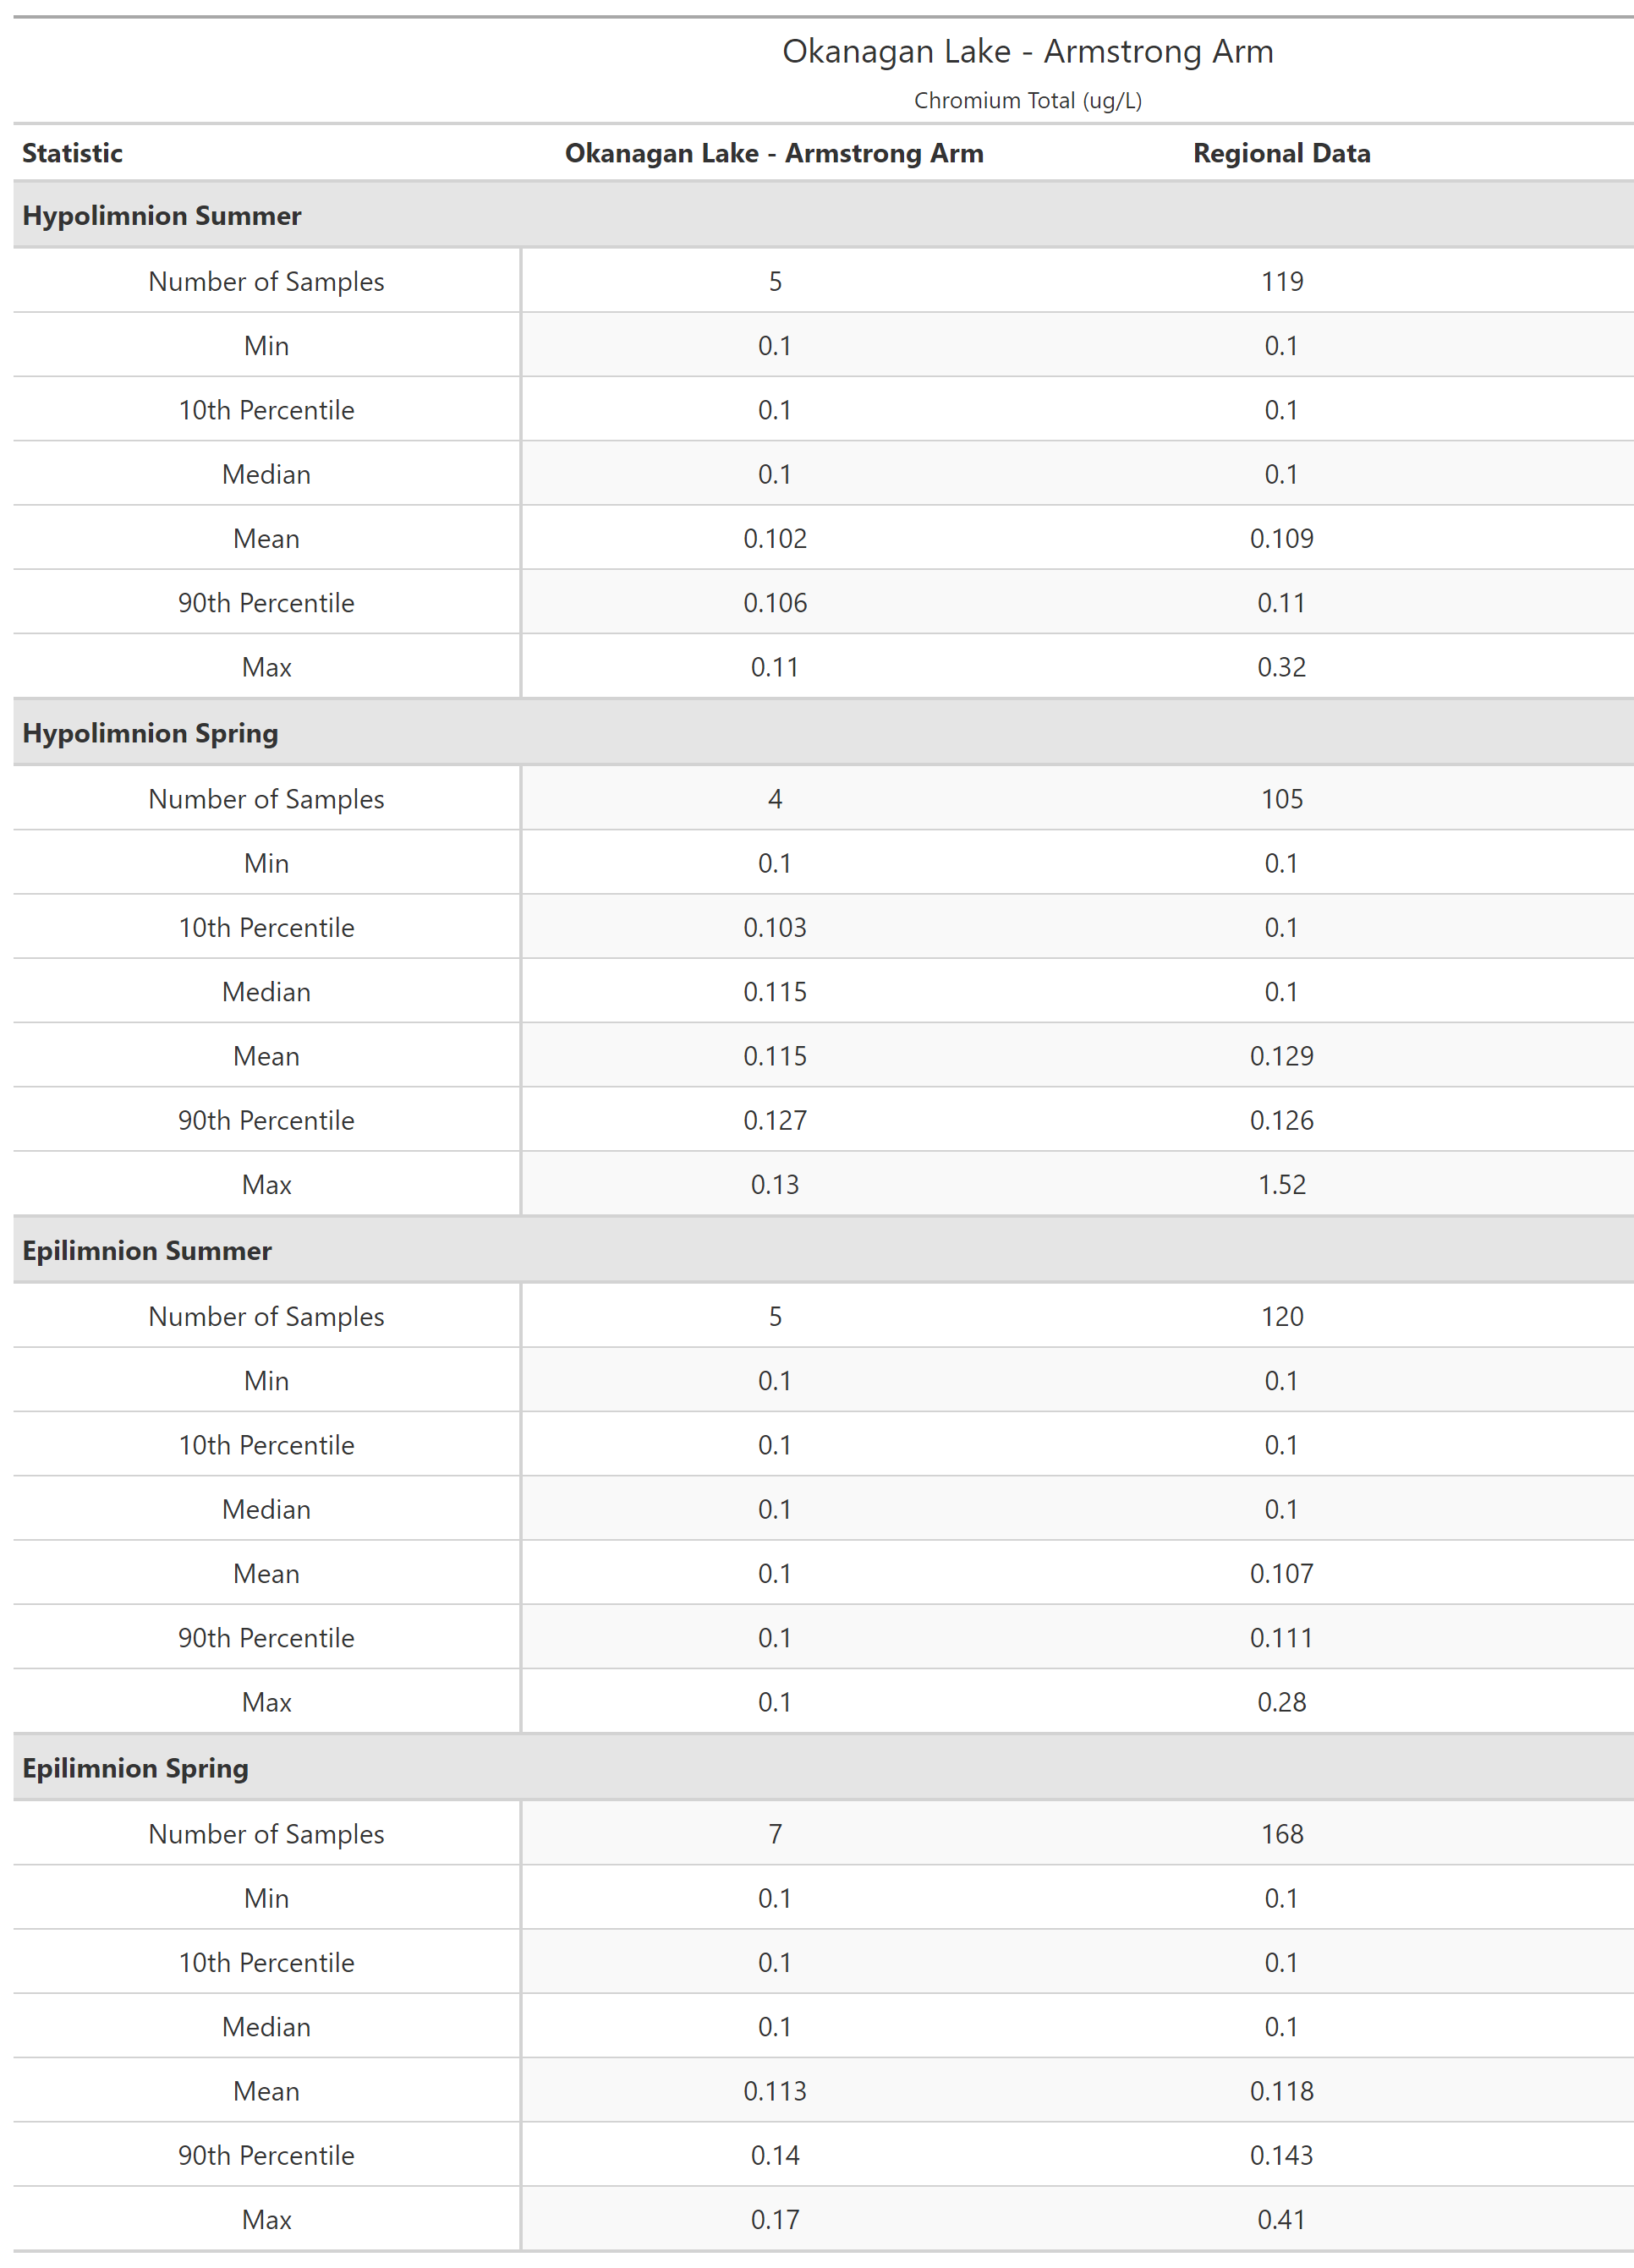 A table of summary statistics for Chromium Total with comparison to regional data